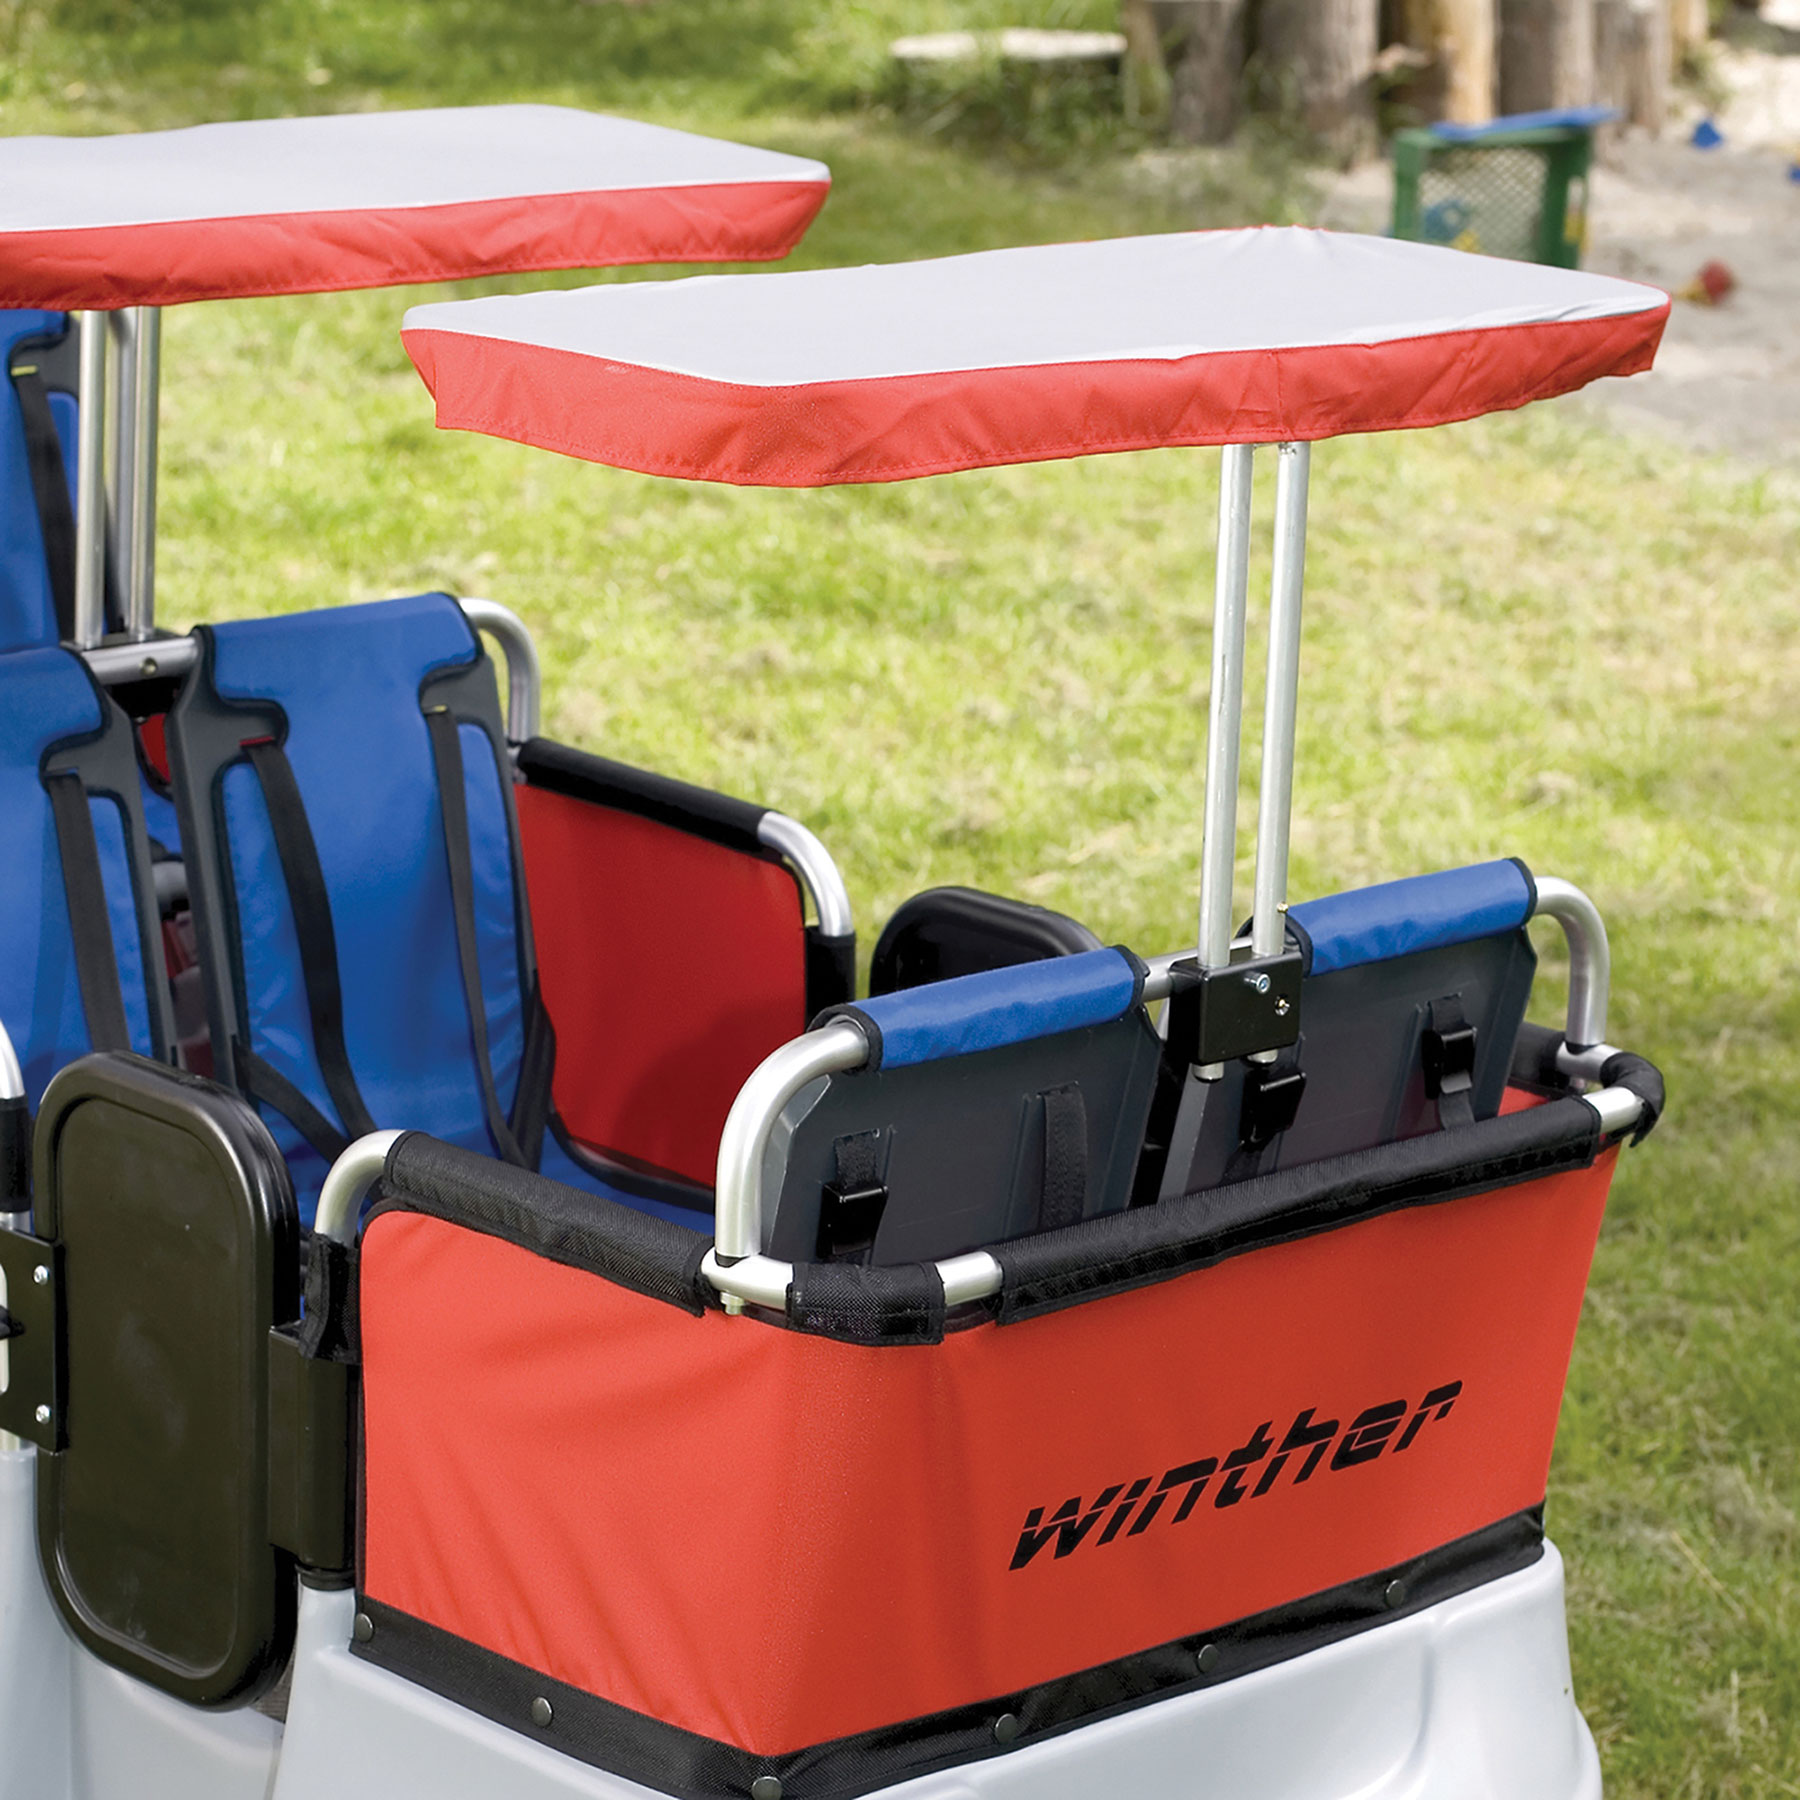 Winther Canopy Cover (2 Seats)